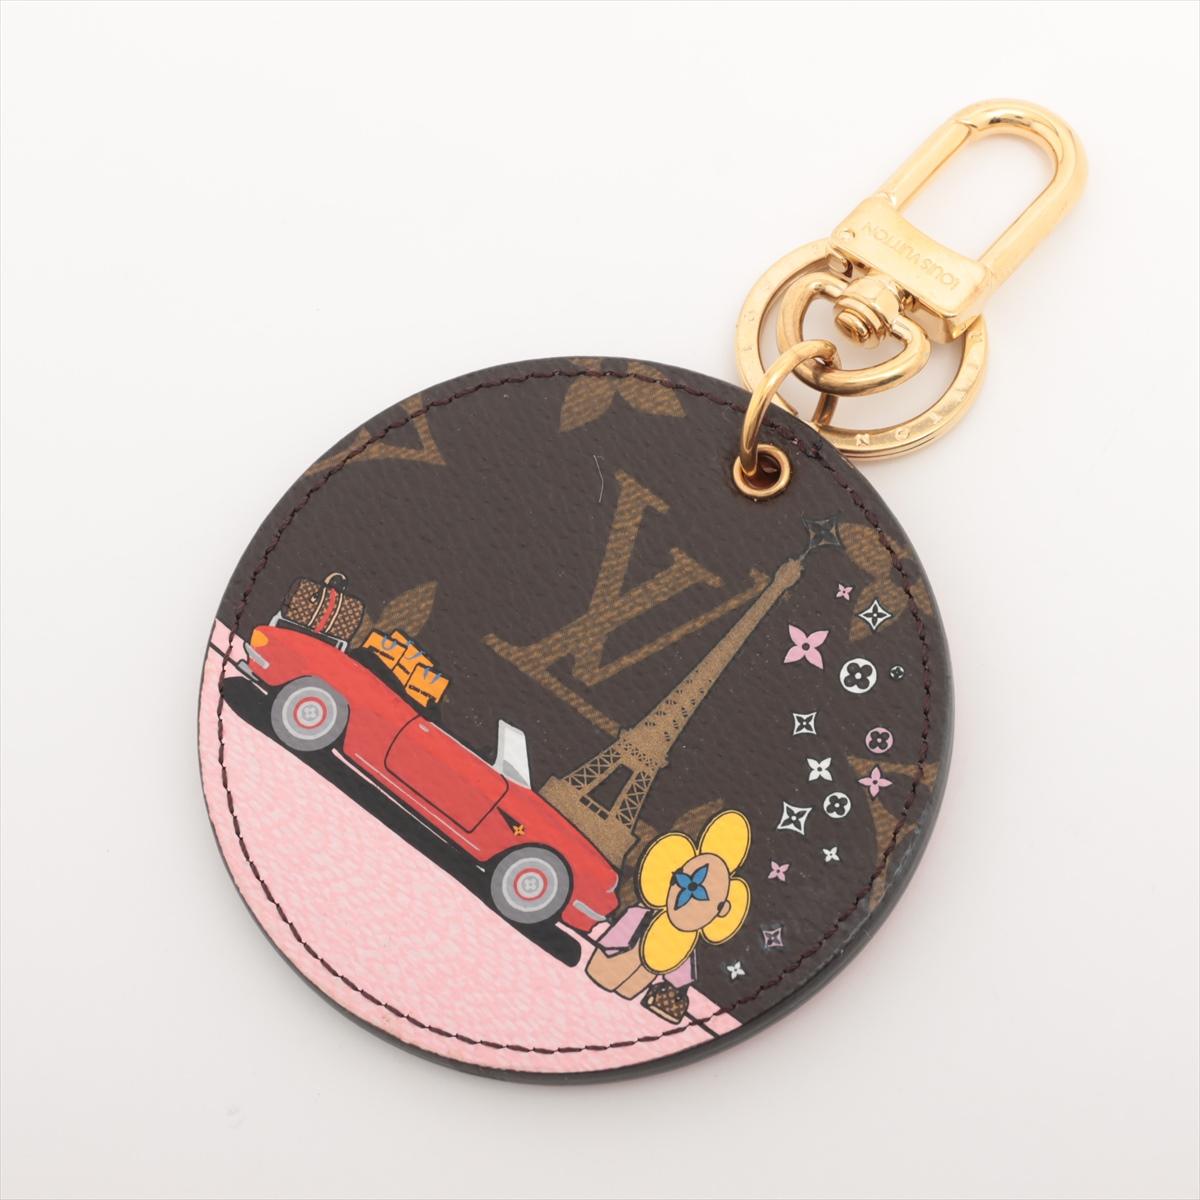 The Louis Vuitton Monogram Illustre Vivienne Paris Bag Charm in a round shape is a delightful and whimsical accessory that adds a touch of Parisian flair to any Louis Vuitton bag. Crafted with meticulous attention to detail, the bag charm features